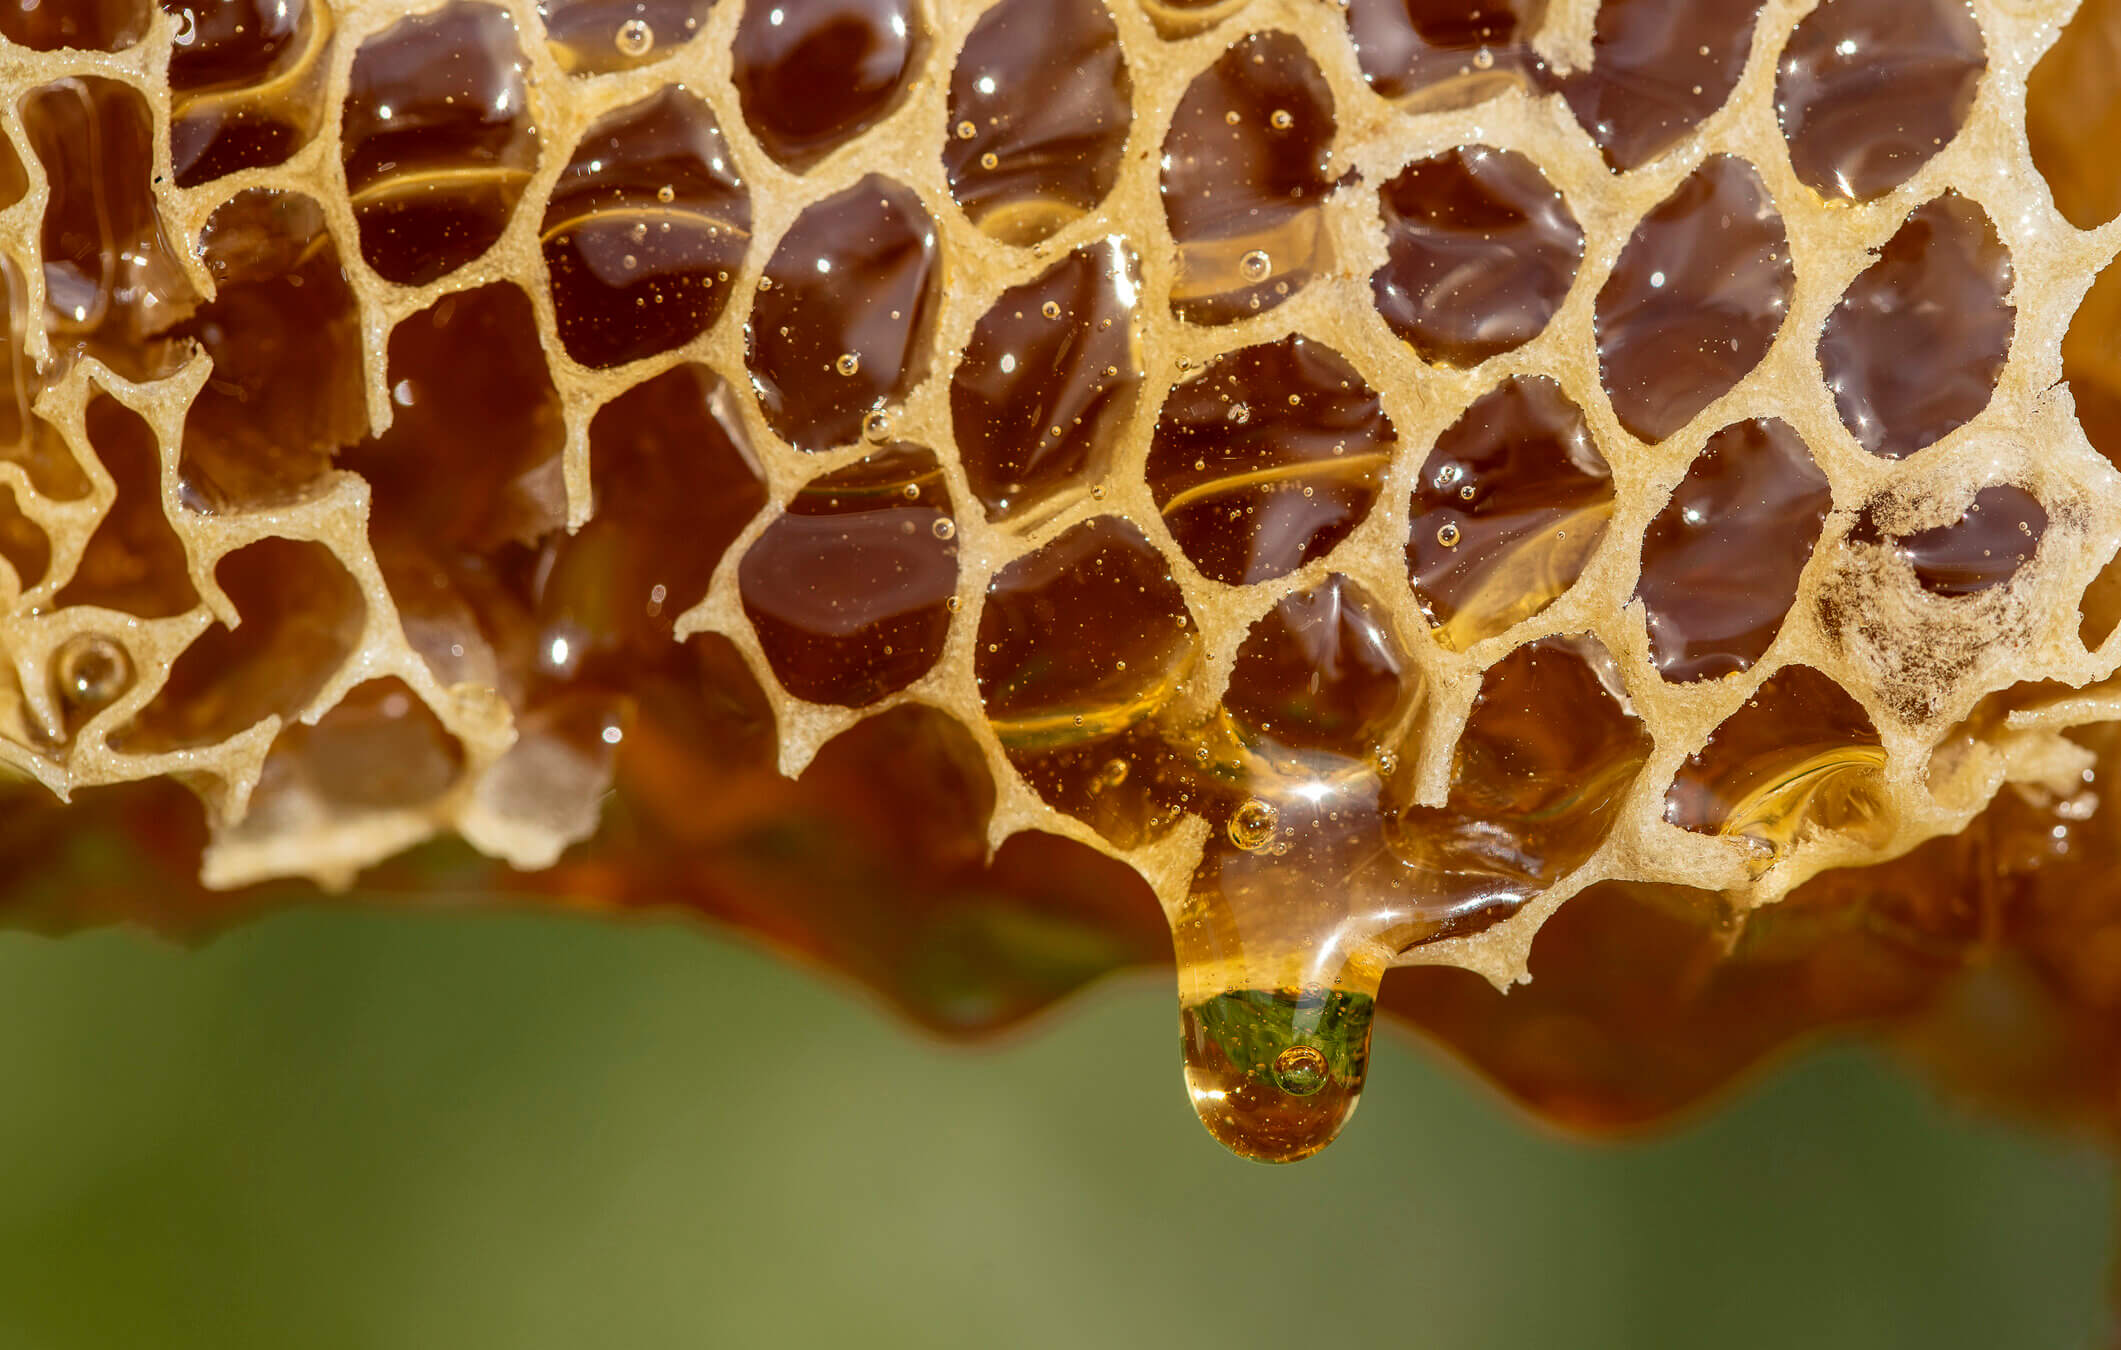 Honey dripping from honeycomb.